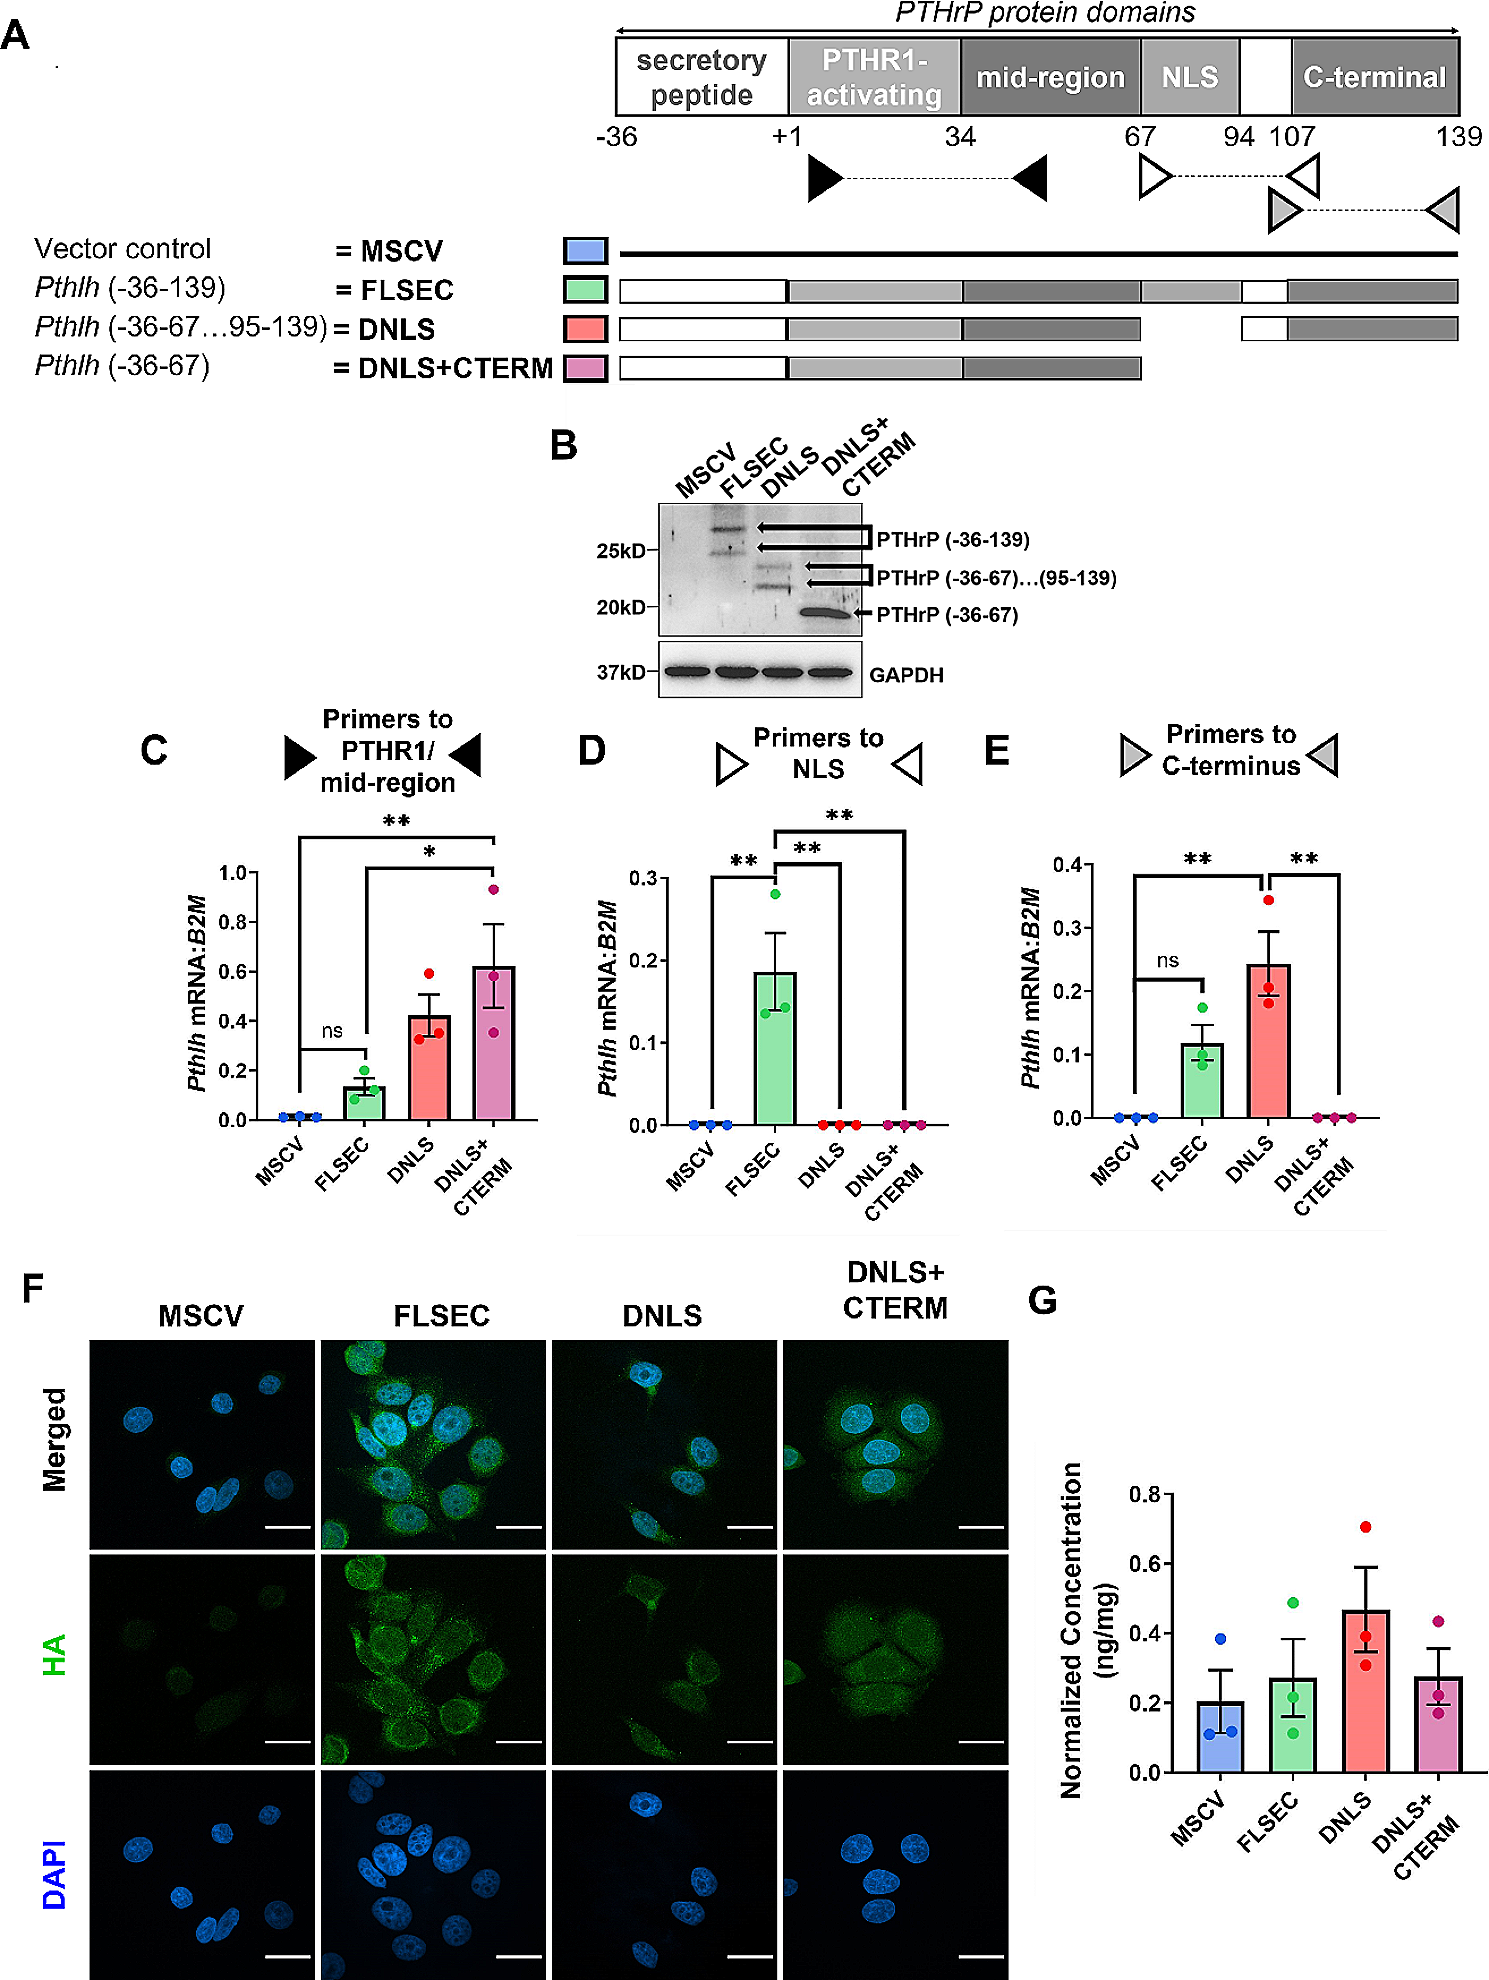 PTHrP intracrine actions divergently influence breast cancer growth through p27 and LIFR